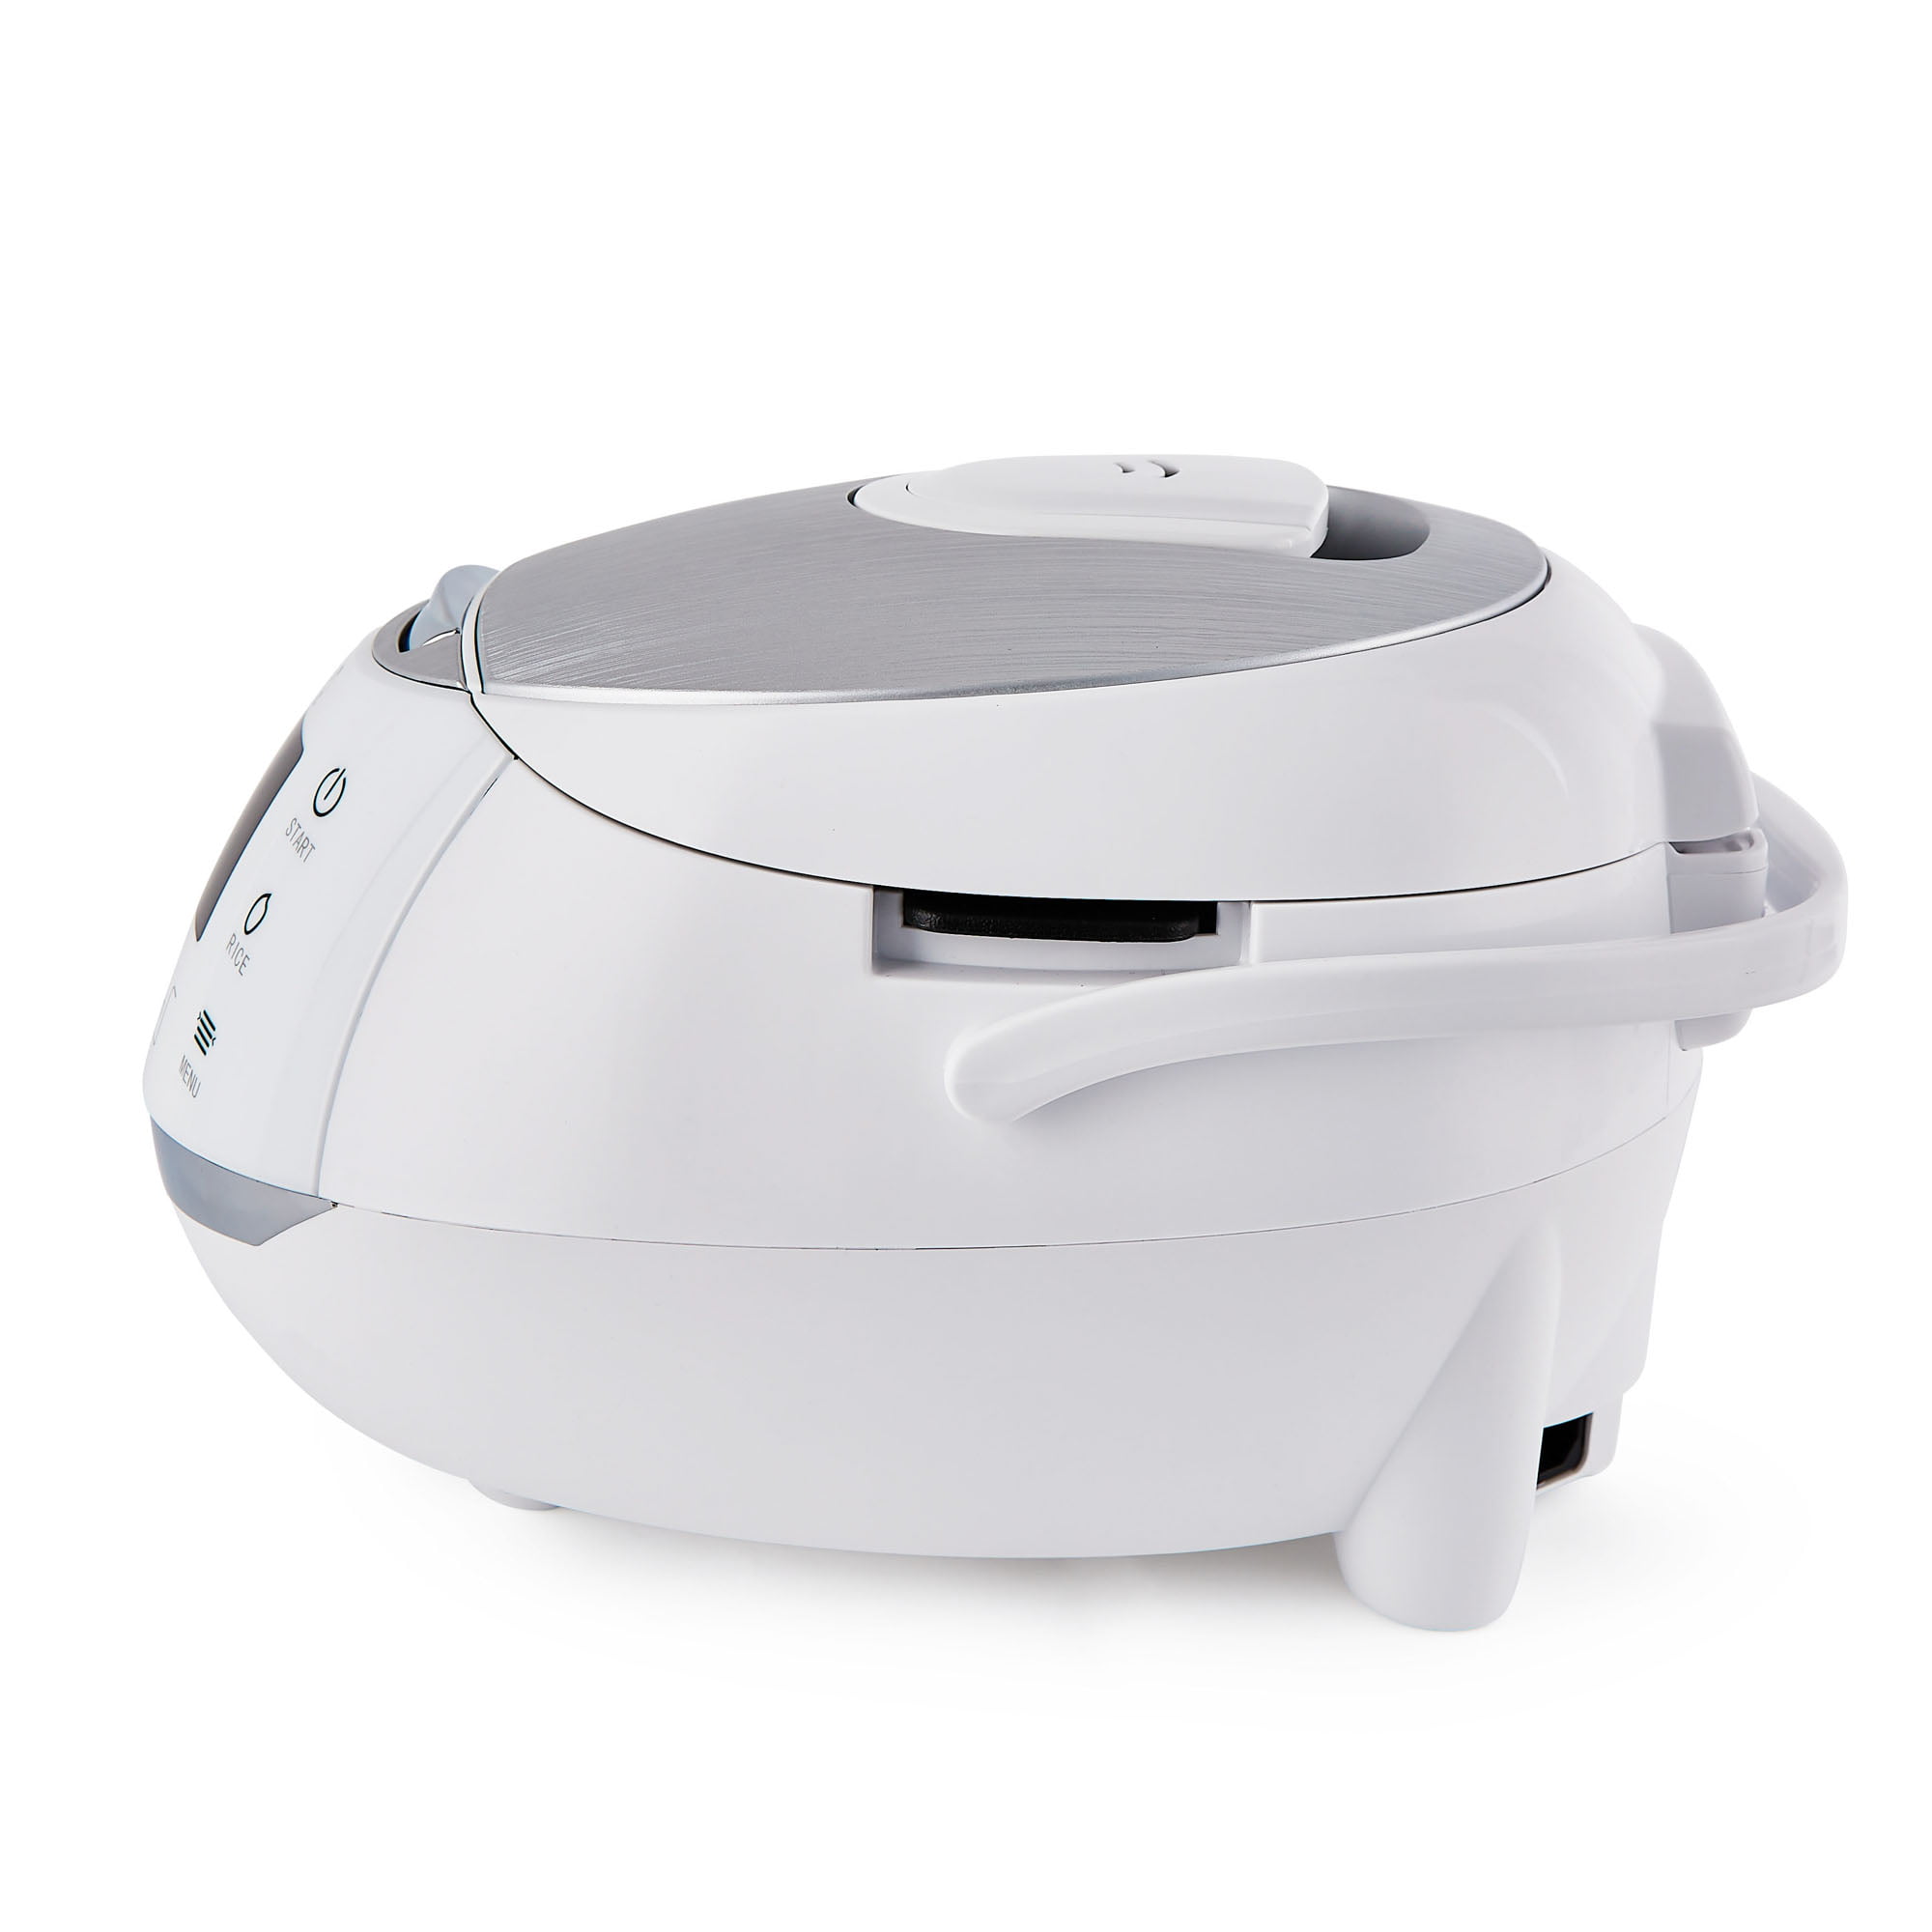 Yum Asia 3.5 Cup Fuzzy Logic Rice Cooker with Ceramic Bowl - 120V, Arctic  White